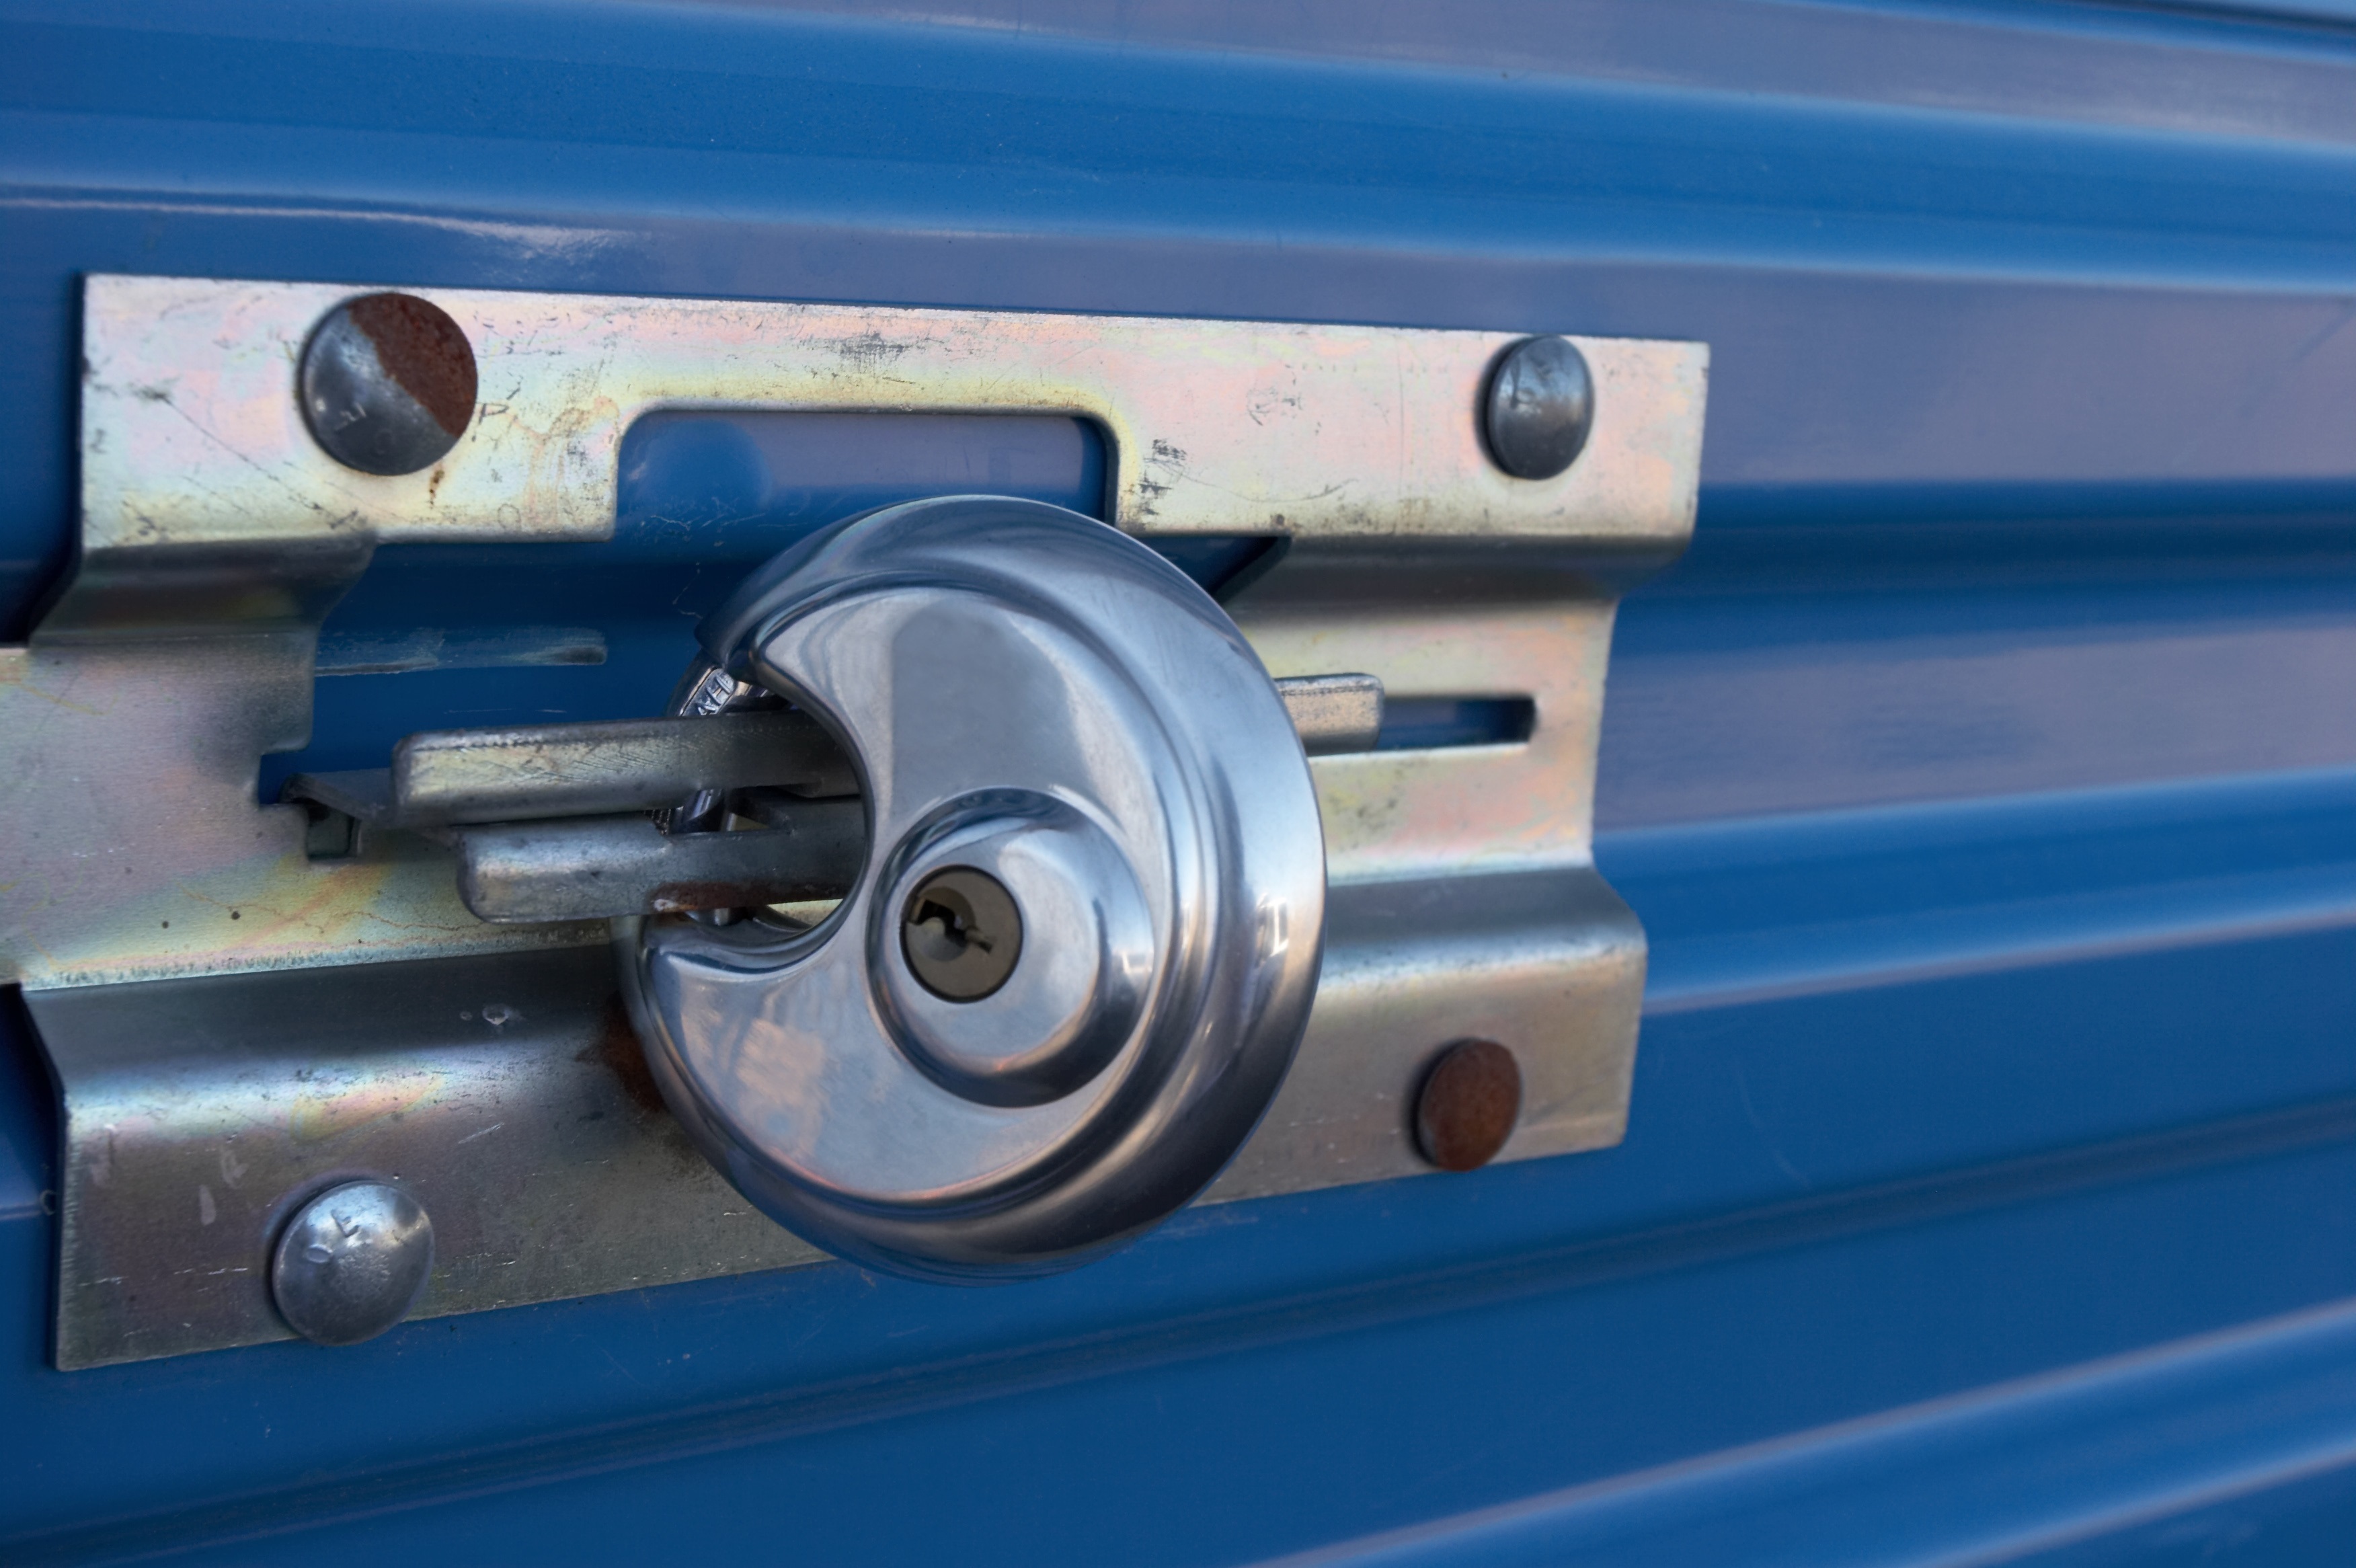 Lock at Midwest Mini Storage & Movers